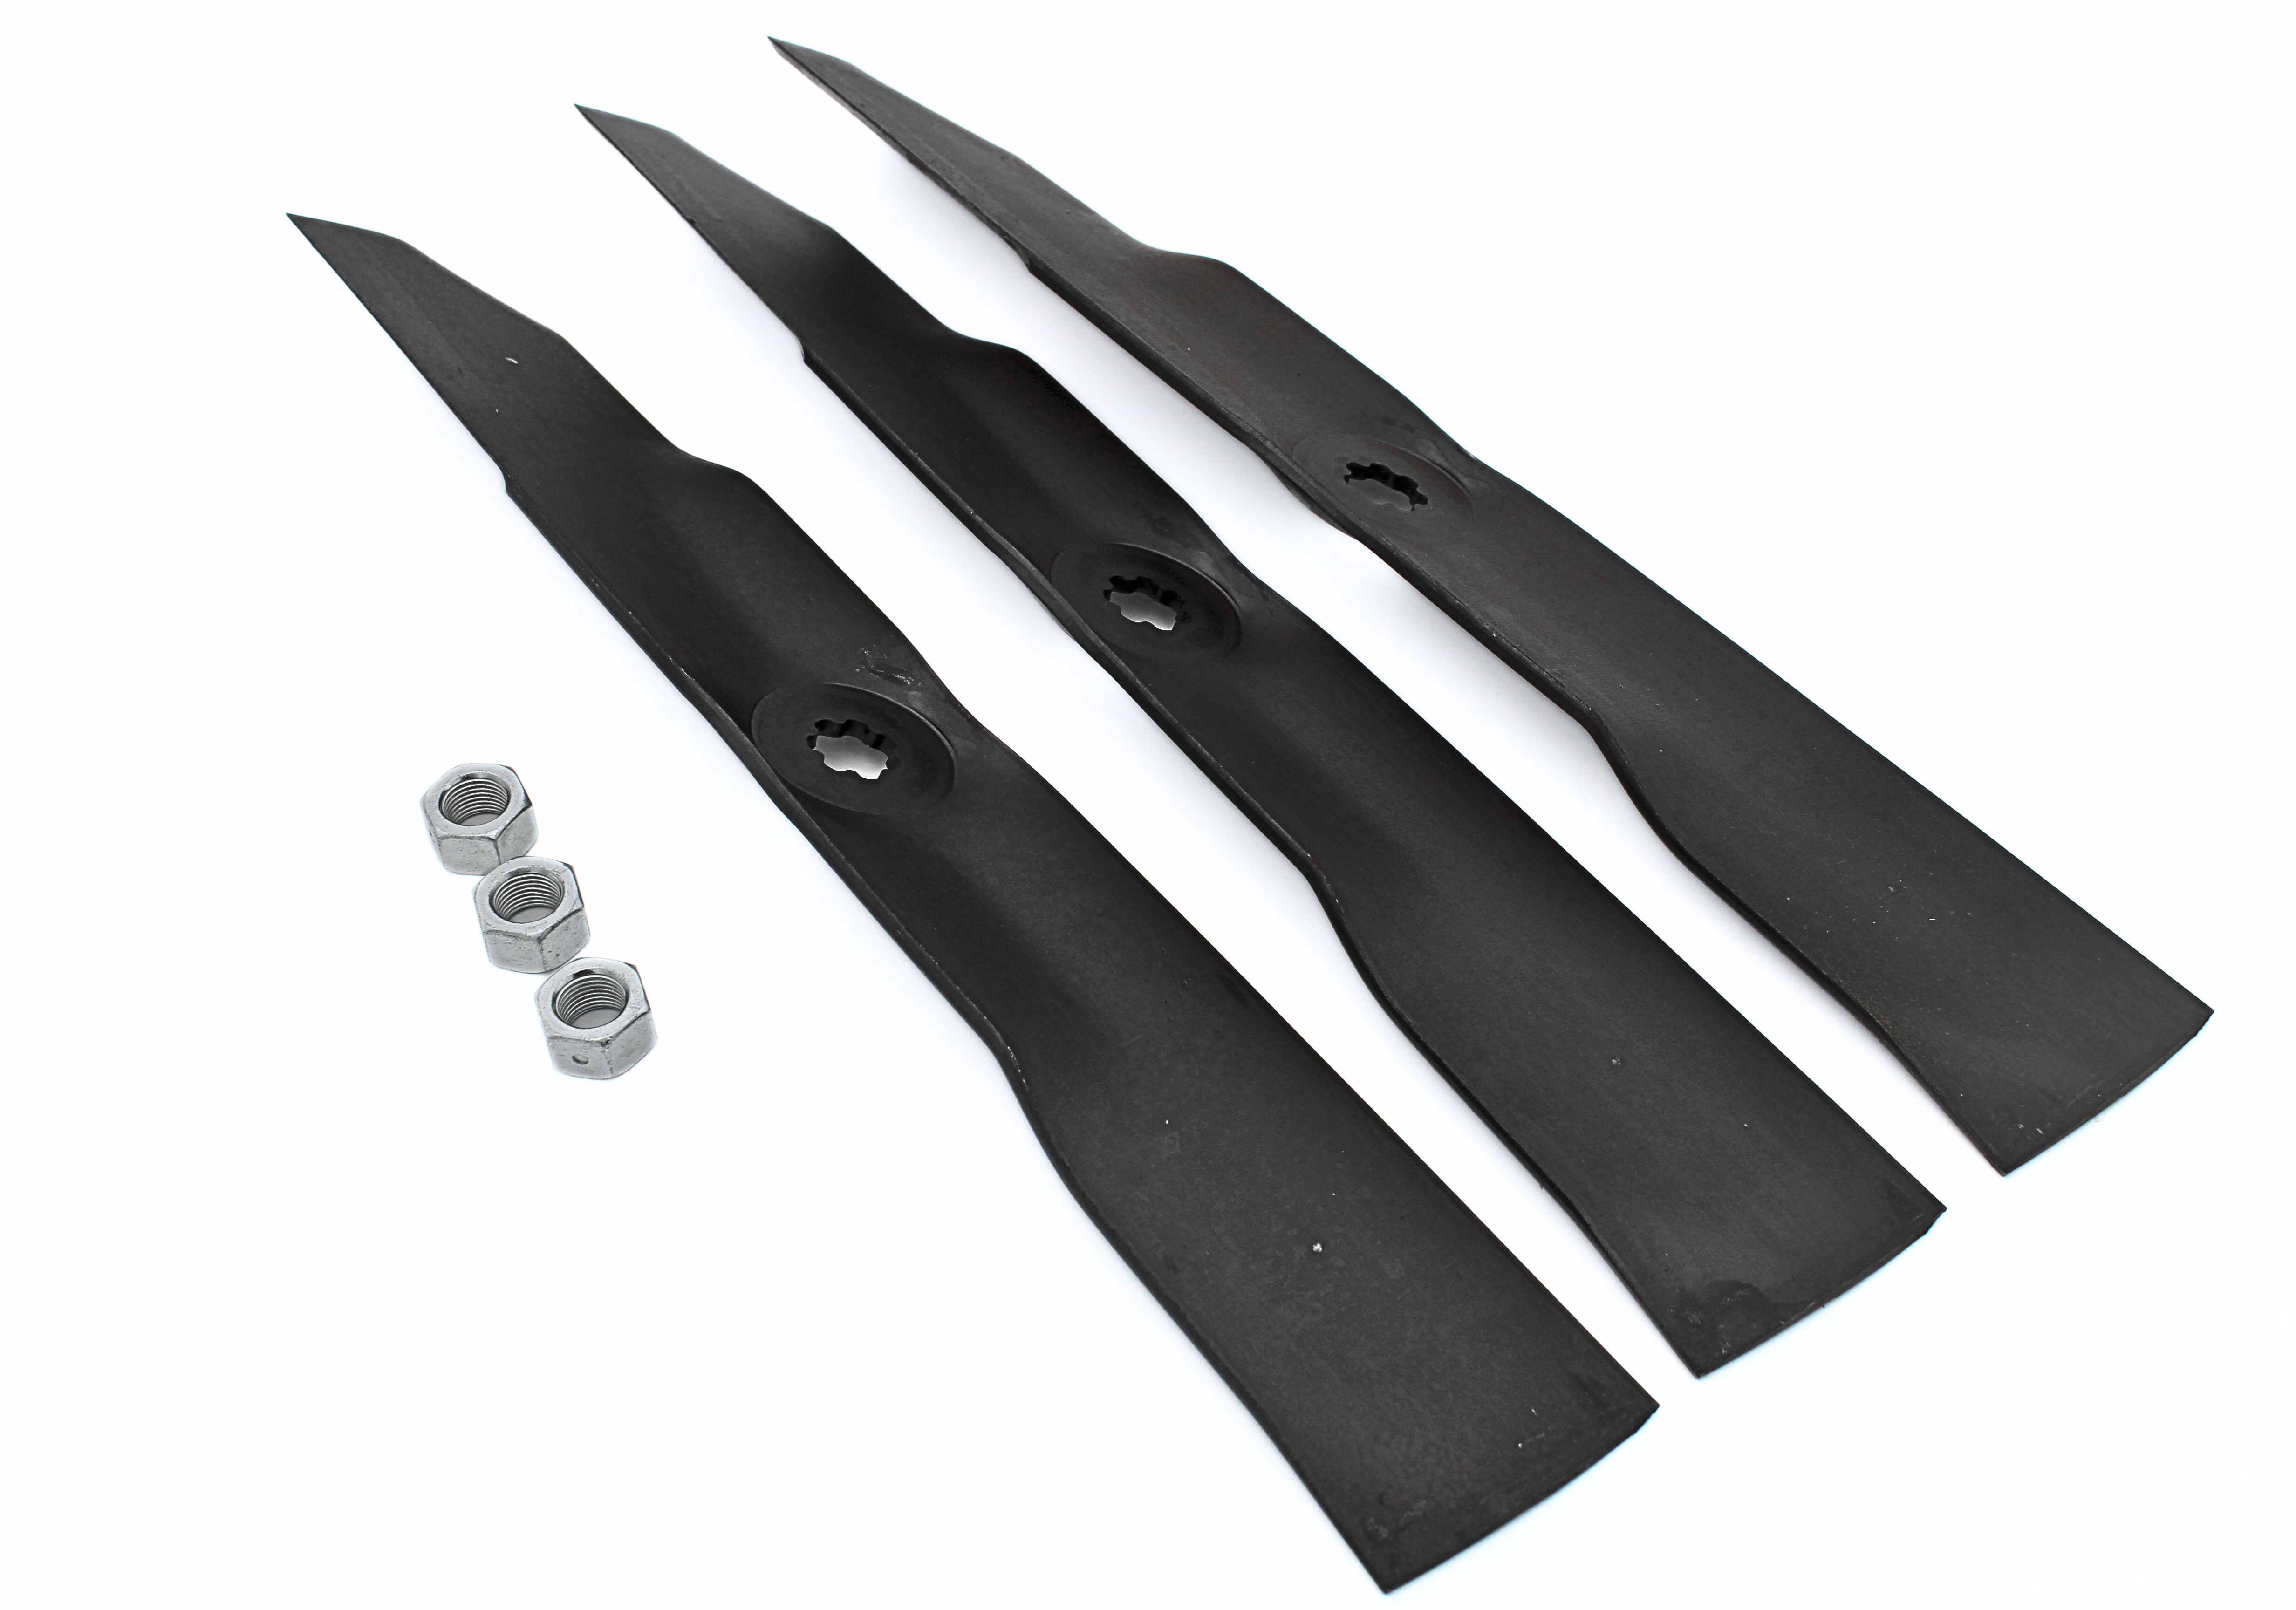 John Deere Lawn Mower Blade Set ( Standard ) For LA Series with 54 inch Deck GY20684 - image 1 of 1